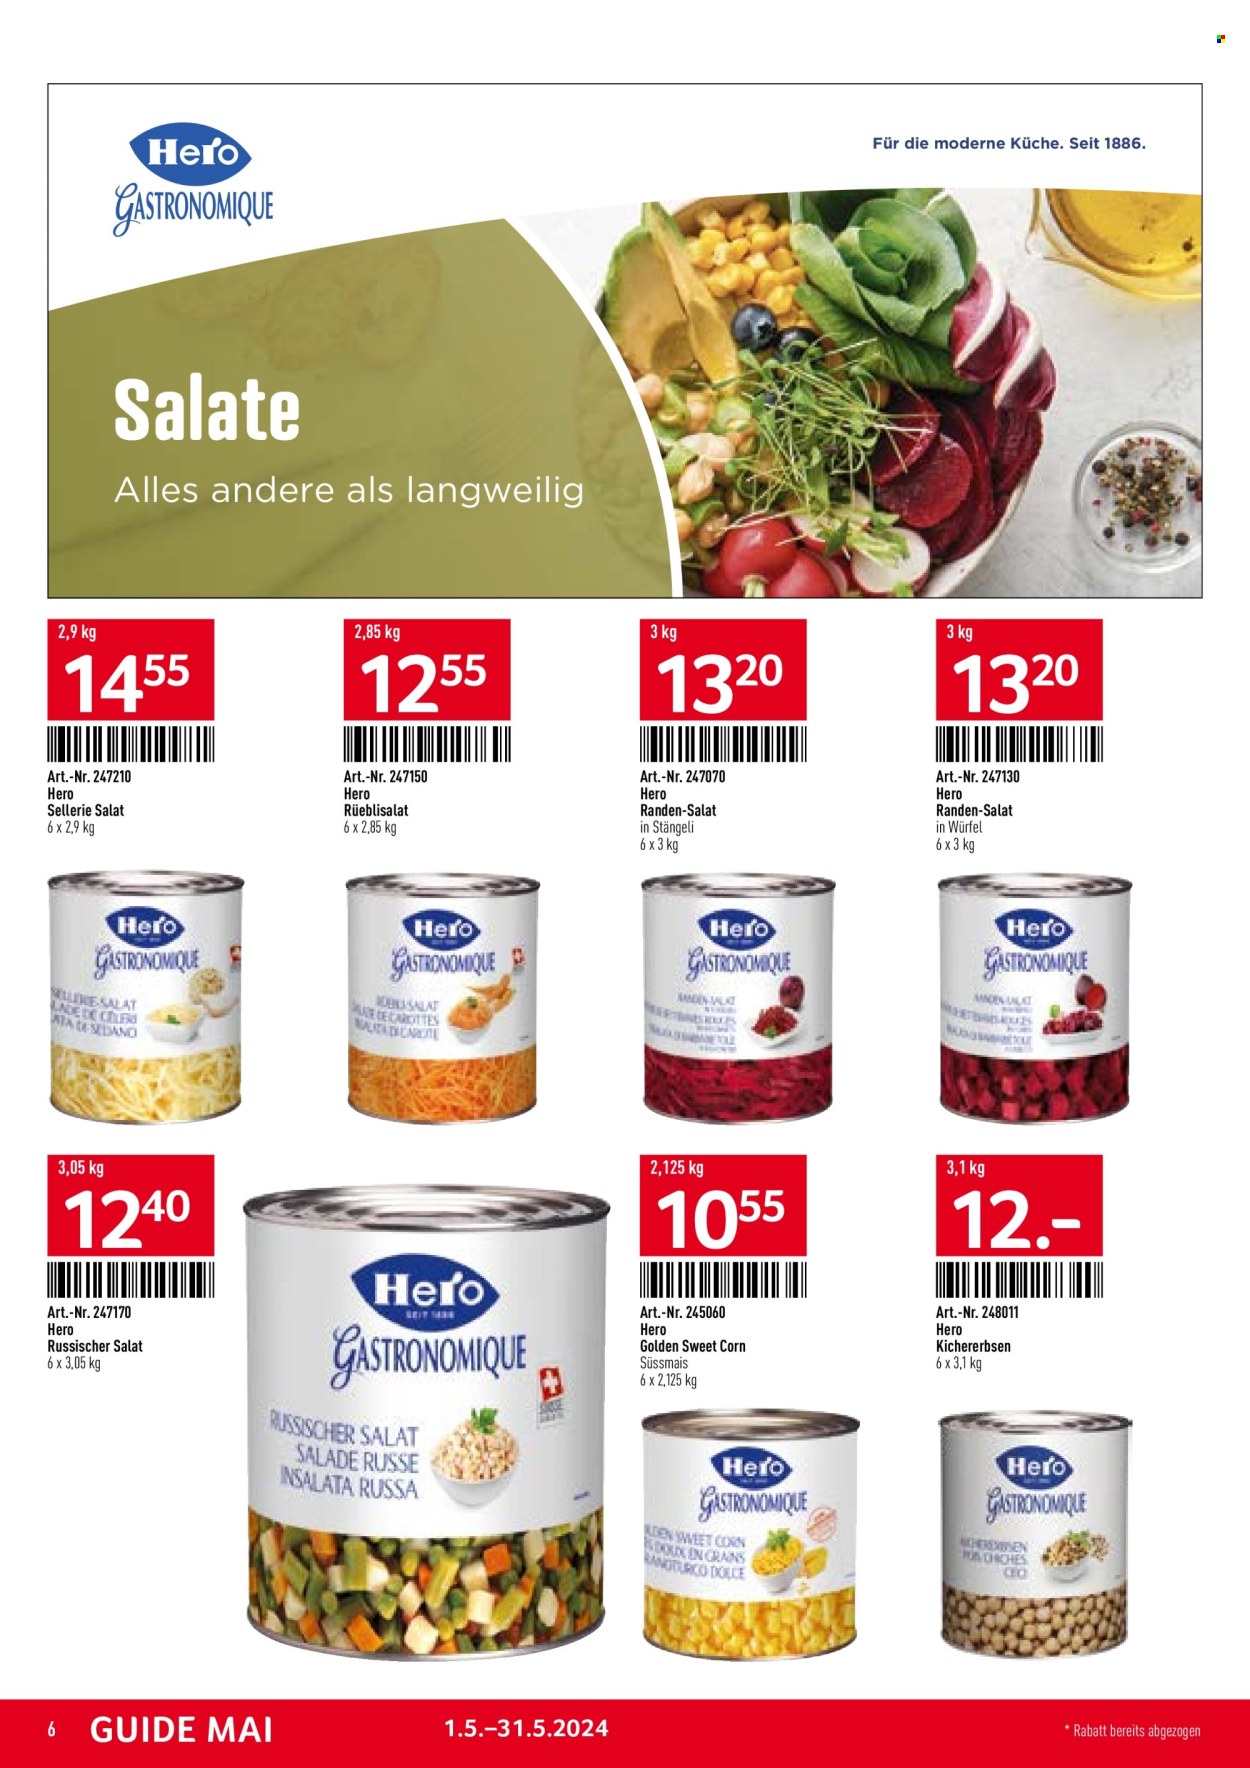 Catalogue TransGourmet - 1.5.2024 - 31.5.2024. Page 6.